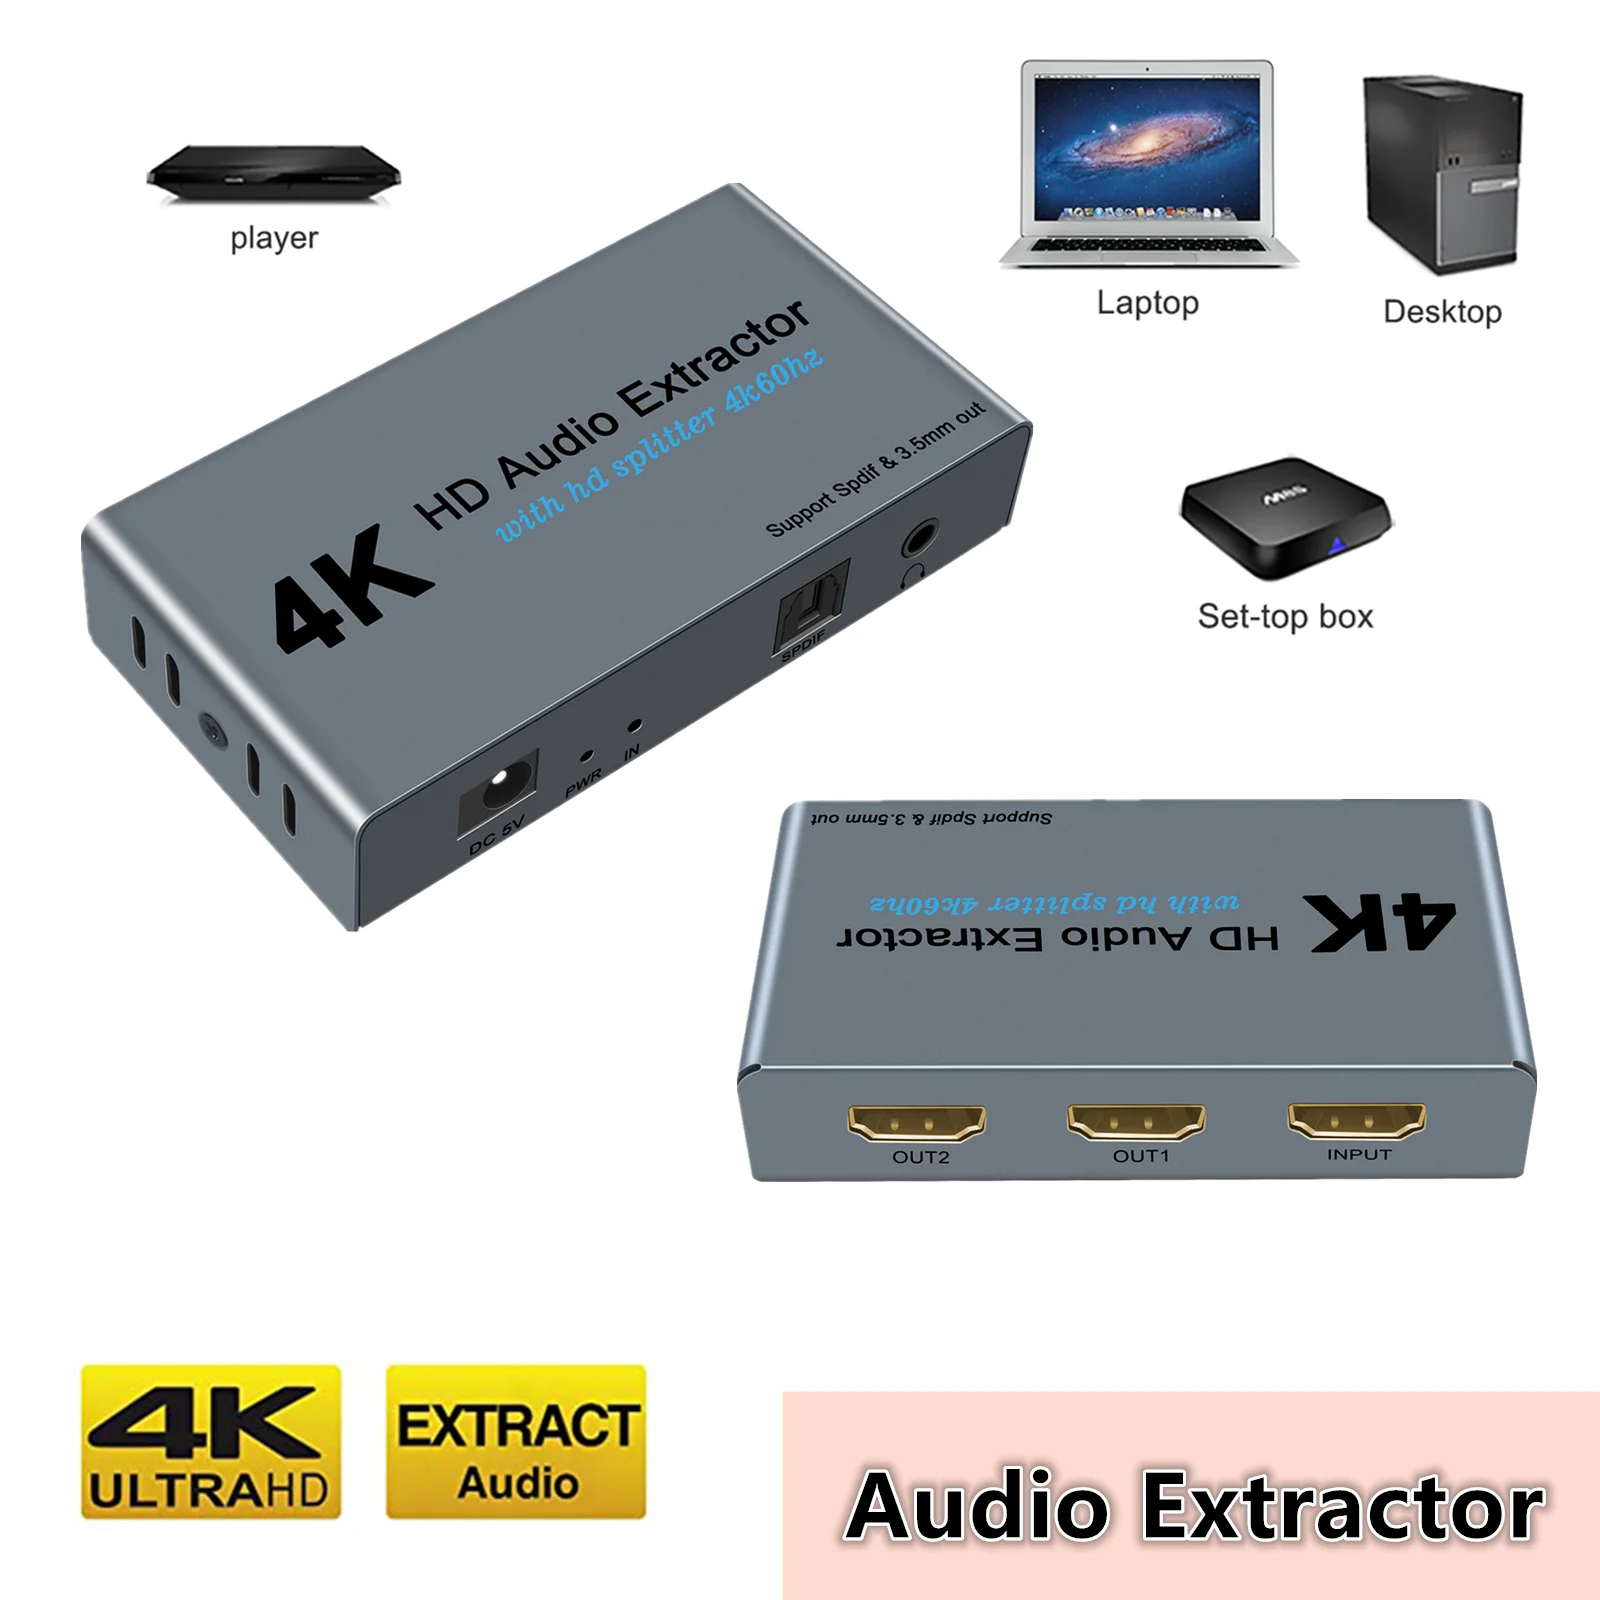 HDMI Audio Extractor Splitter 1X2 4K 60HZ HDMI to Optical Spdif Toslink with HDMI and 3.5mm Stereo Audio Converter Adapter